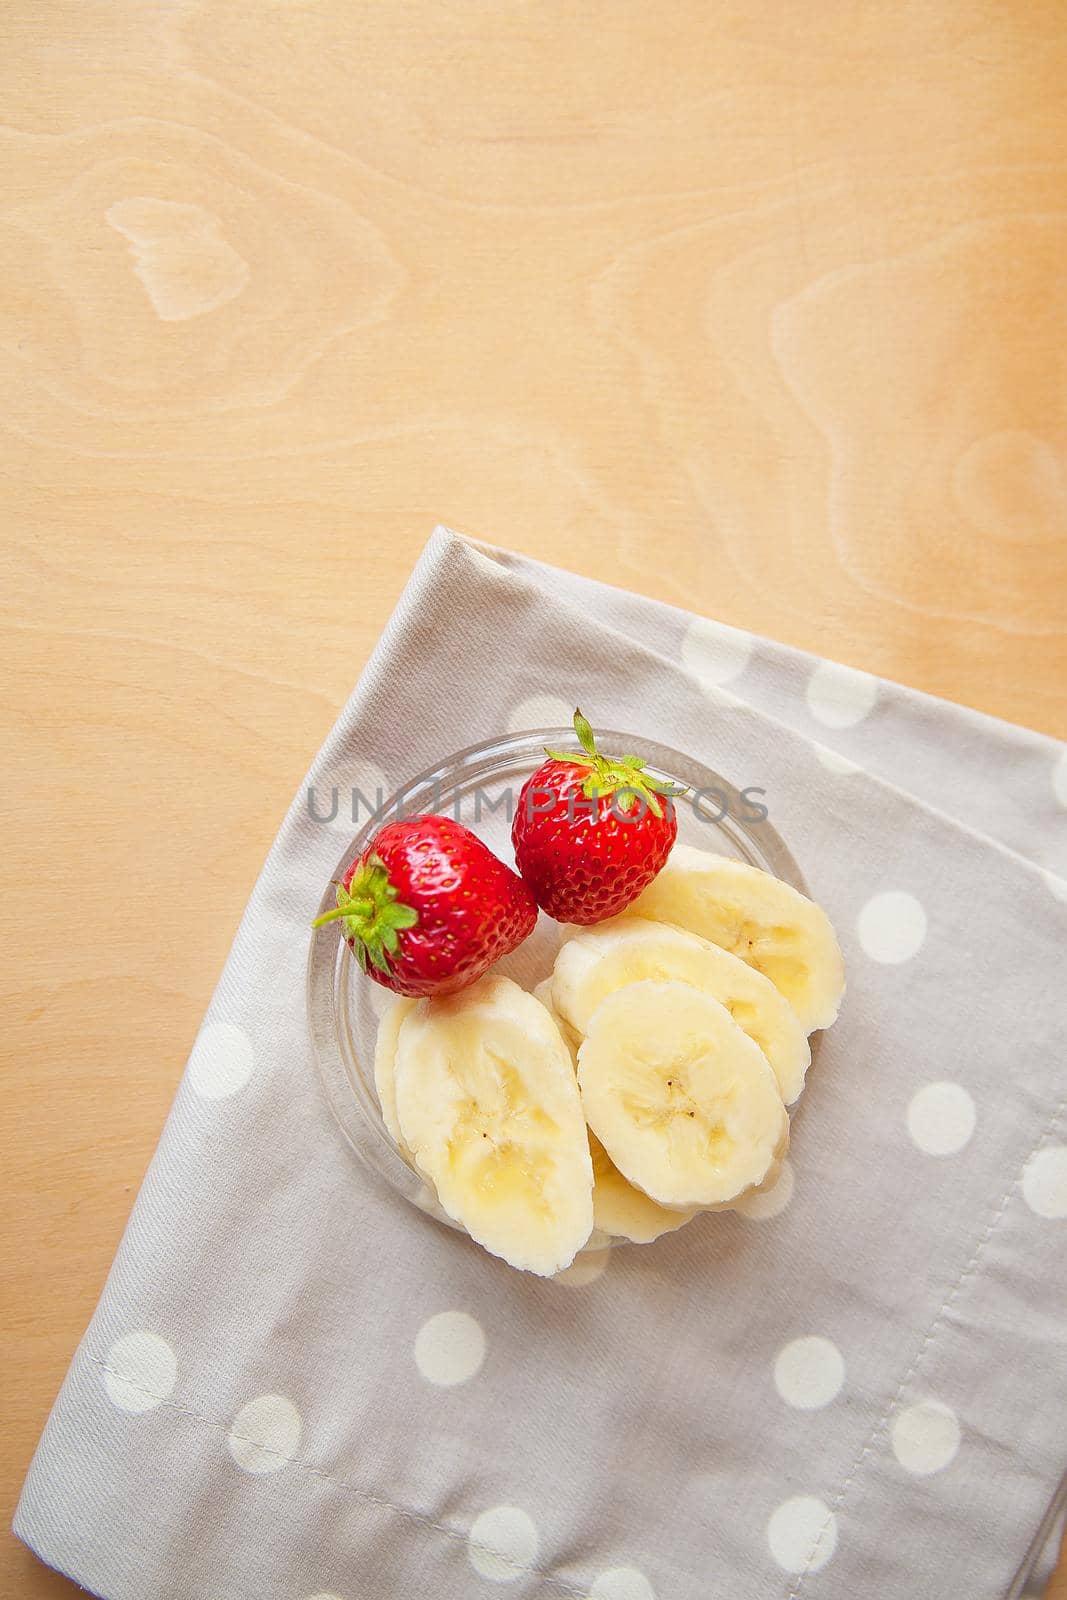 strawberry and banana on a glass plate on a wooden background by sfinks